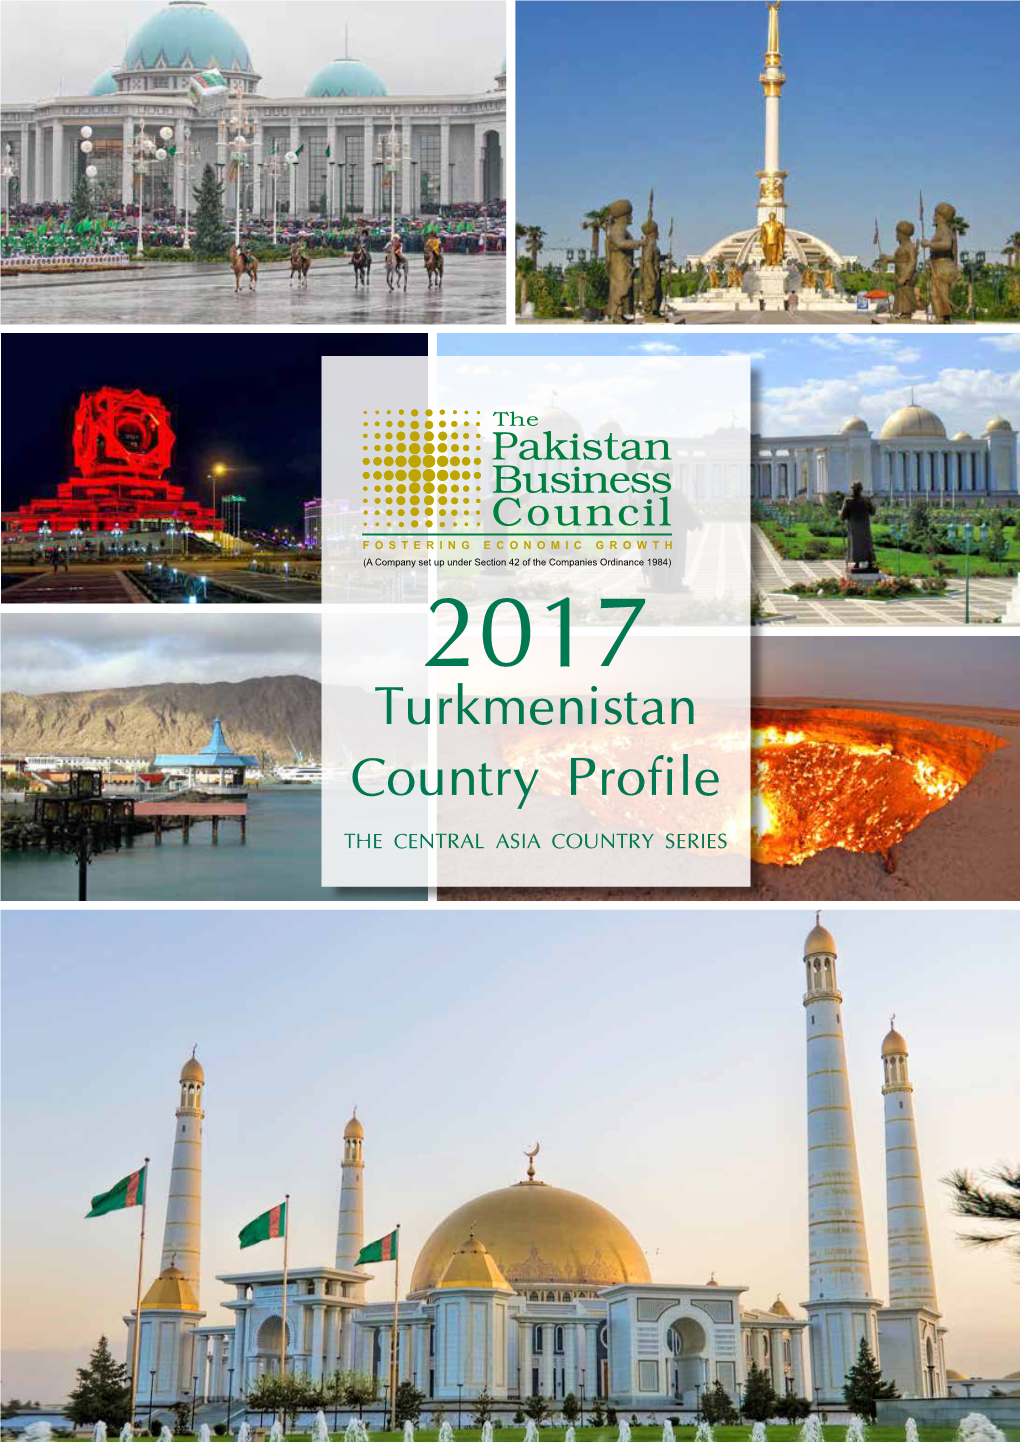 Turkmenistan Country Profile the CENTRAL ASIA COUNTRY SERIES